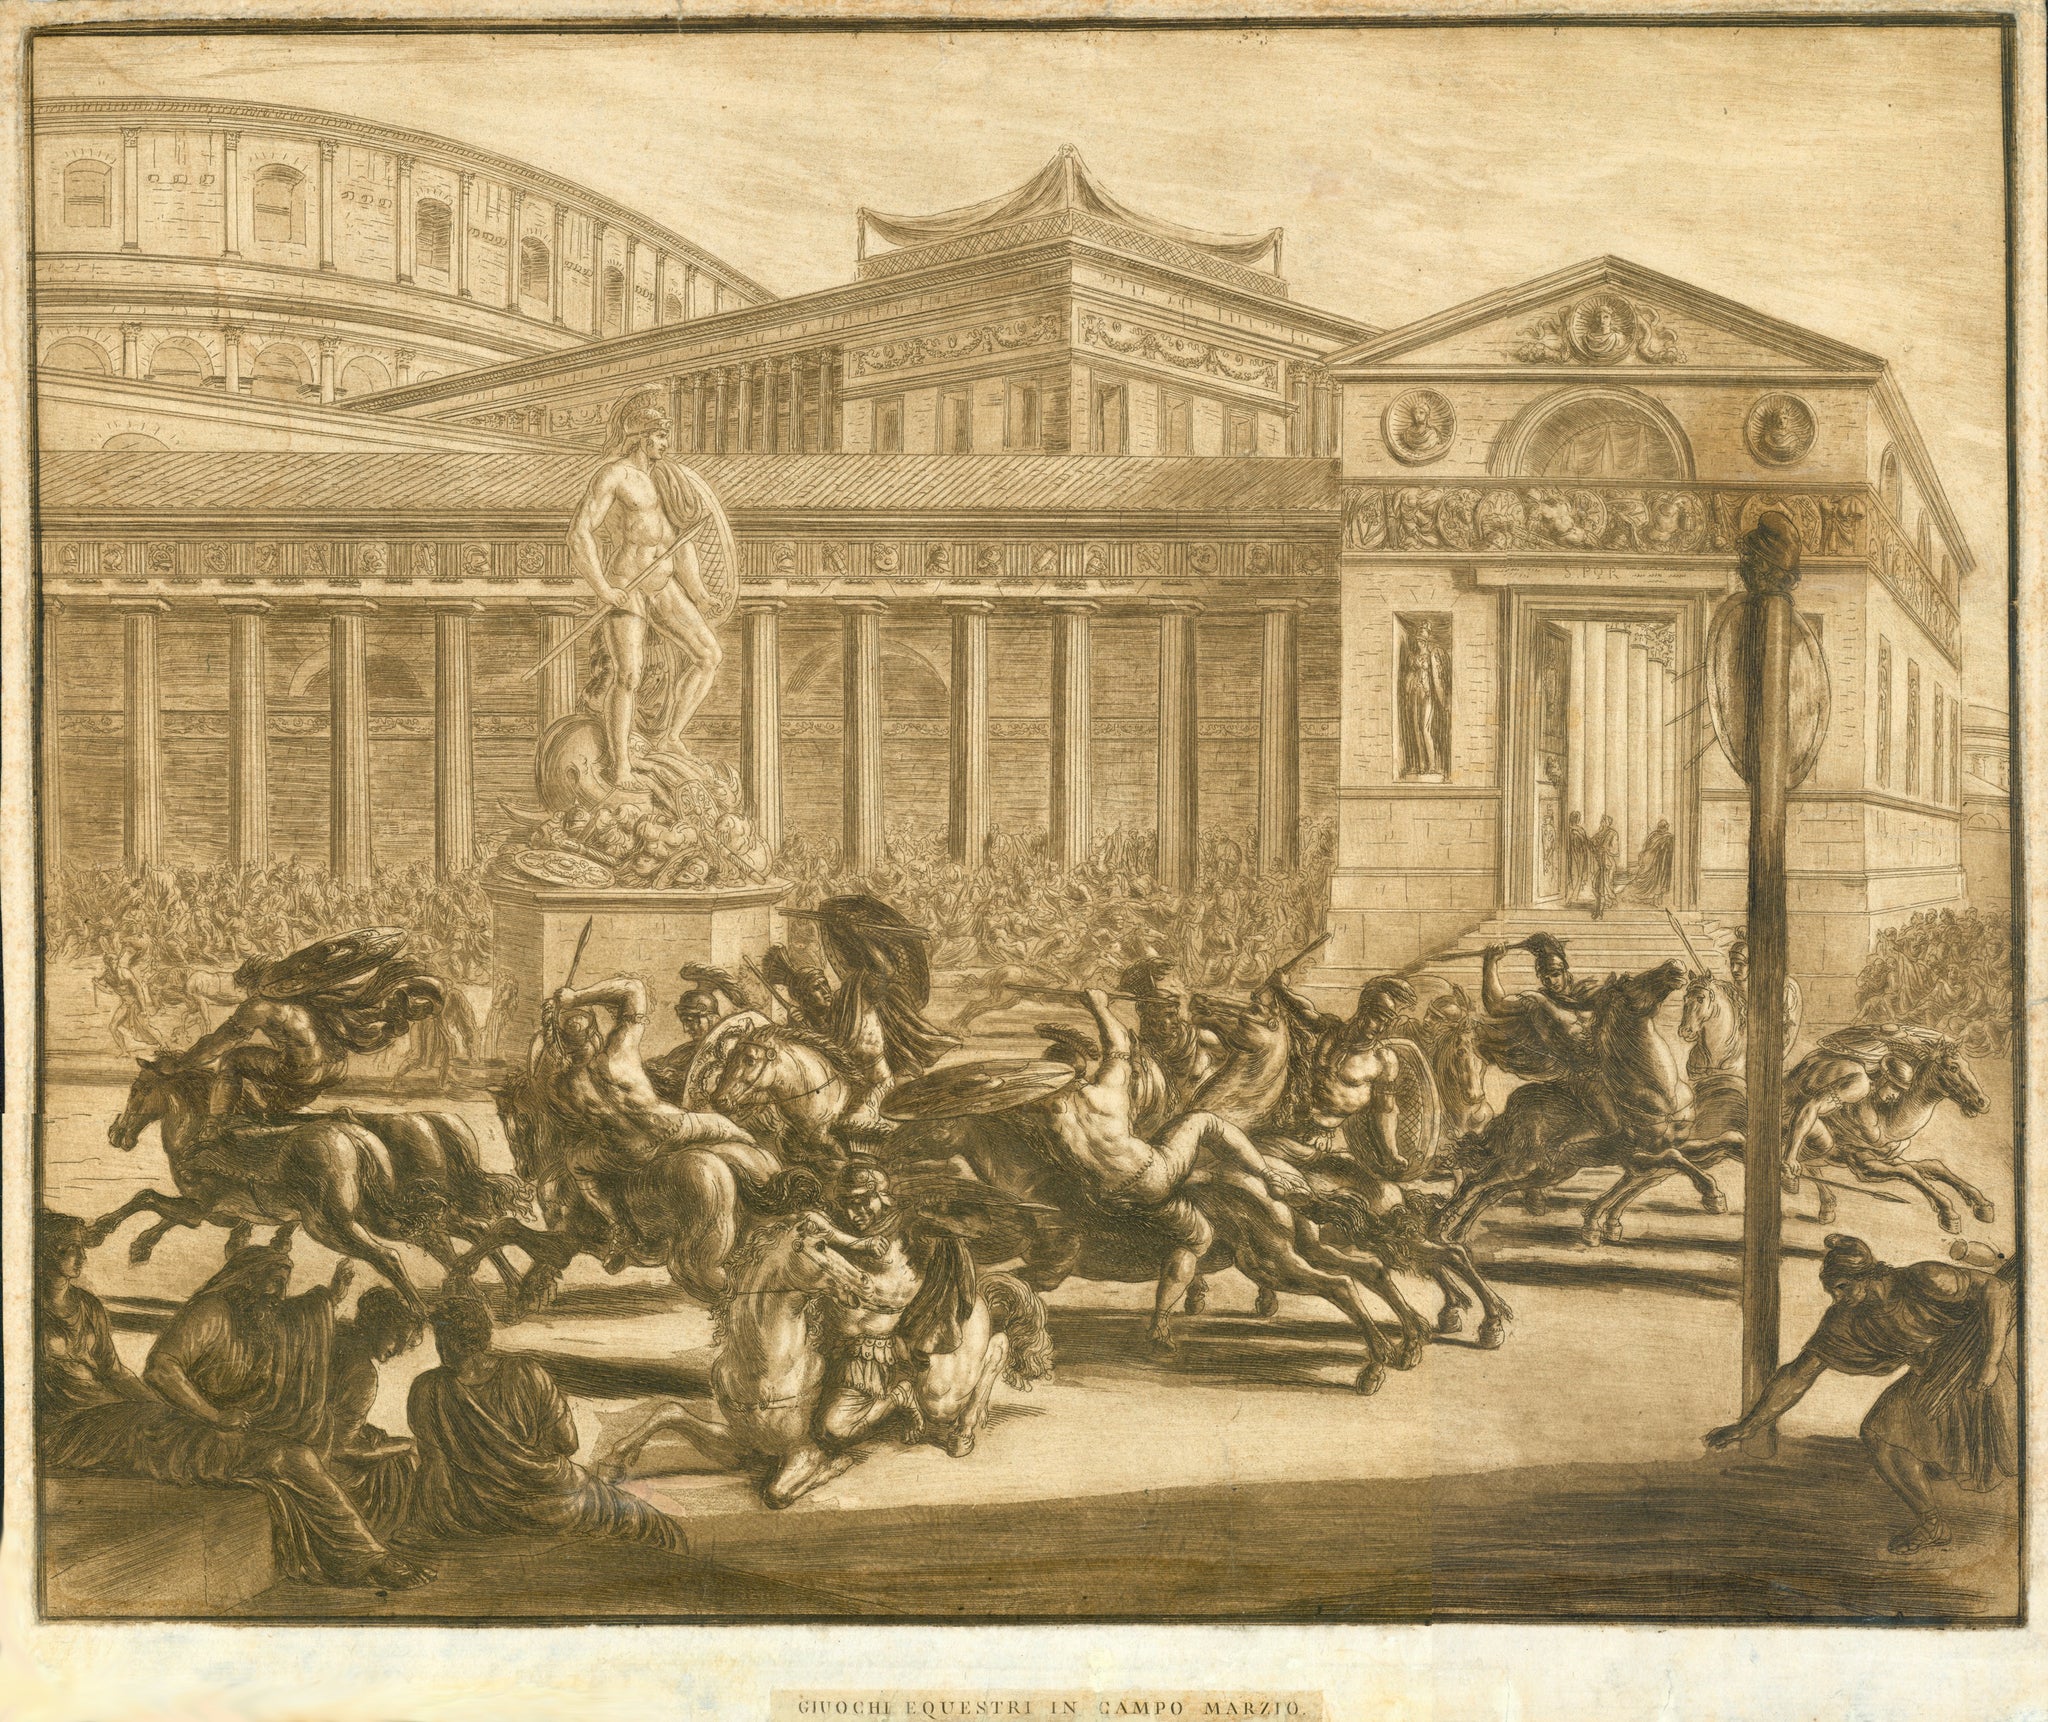 Rome. - "Giuochi Equestri in Campo Marzio"  Mezzotinta and copper etching in warm sepia color.  There is no credit for artist, nor name of publisher. We have checked the internet up and down, also the publicized inventory of the British Library, usually a sure source of knowledge. But we could not find a single hint for this beautiful print. So we have to stay vague - unless a reader of this can help. Any hint is very welcome.